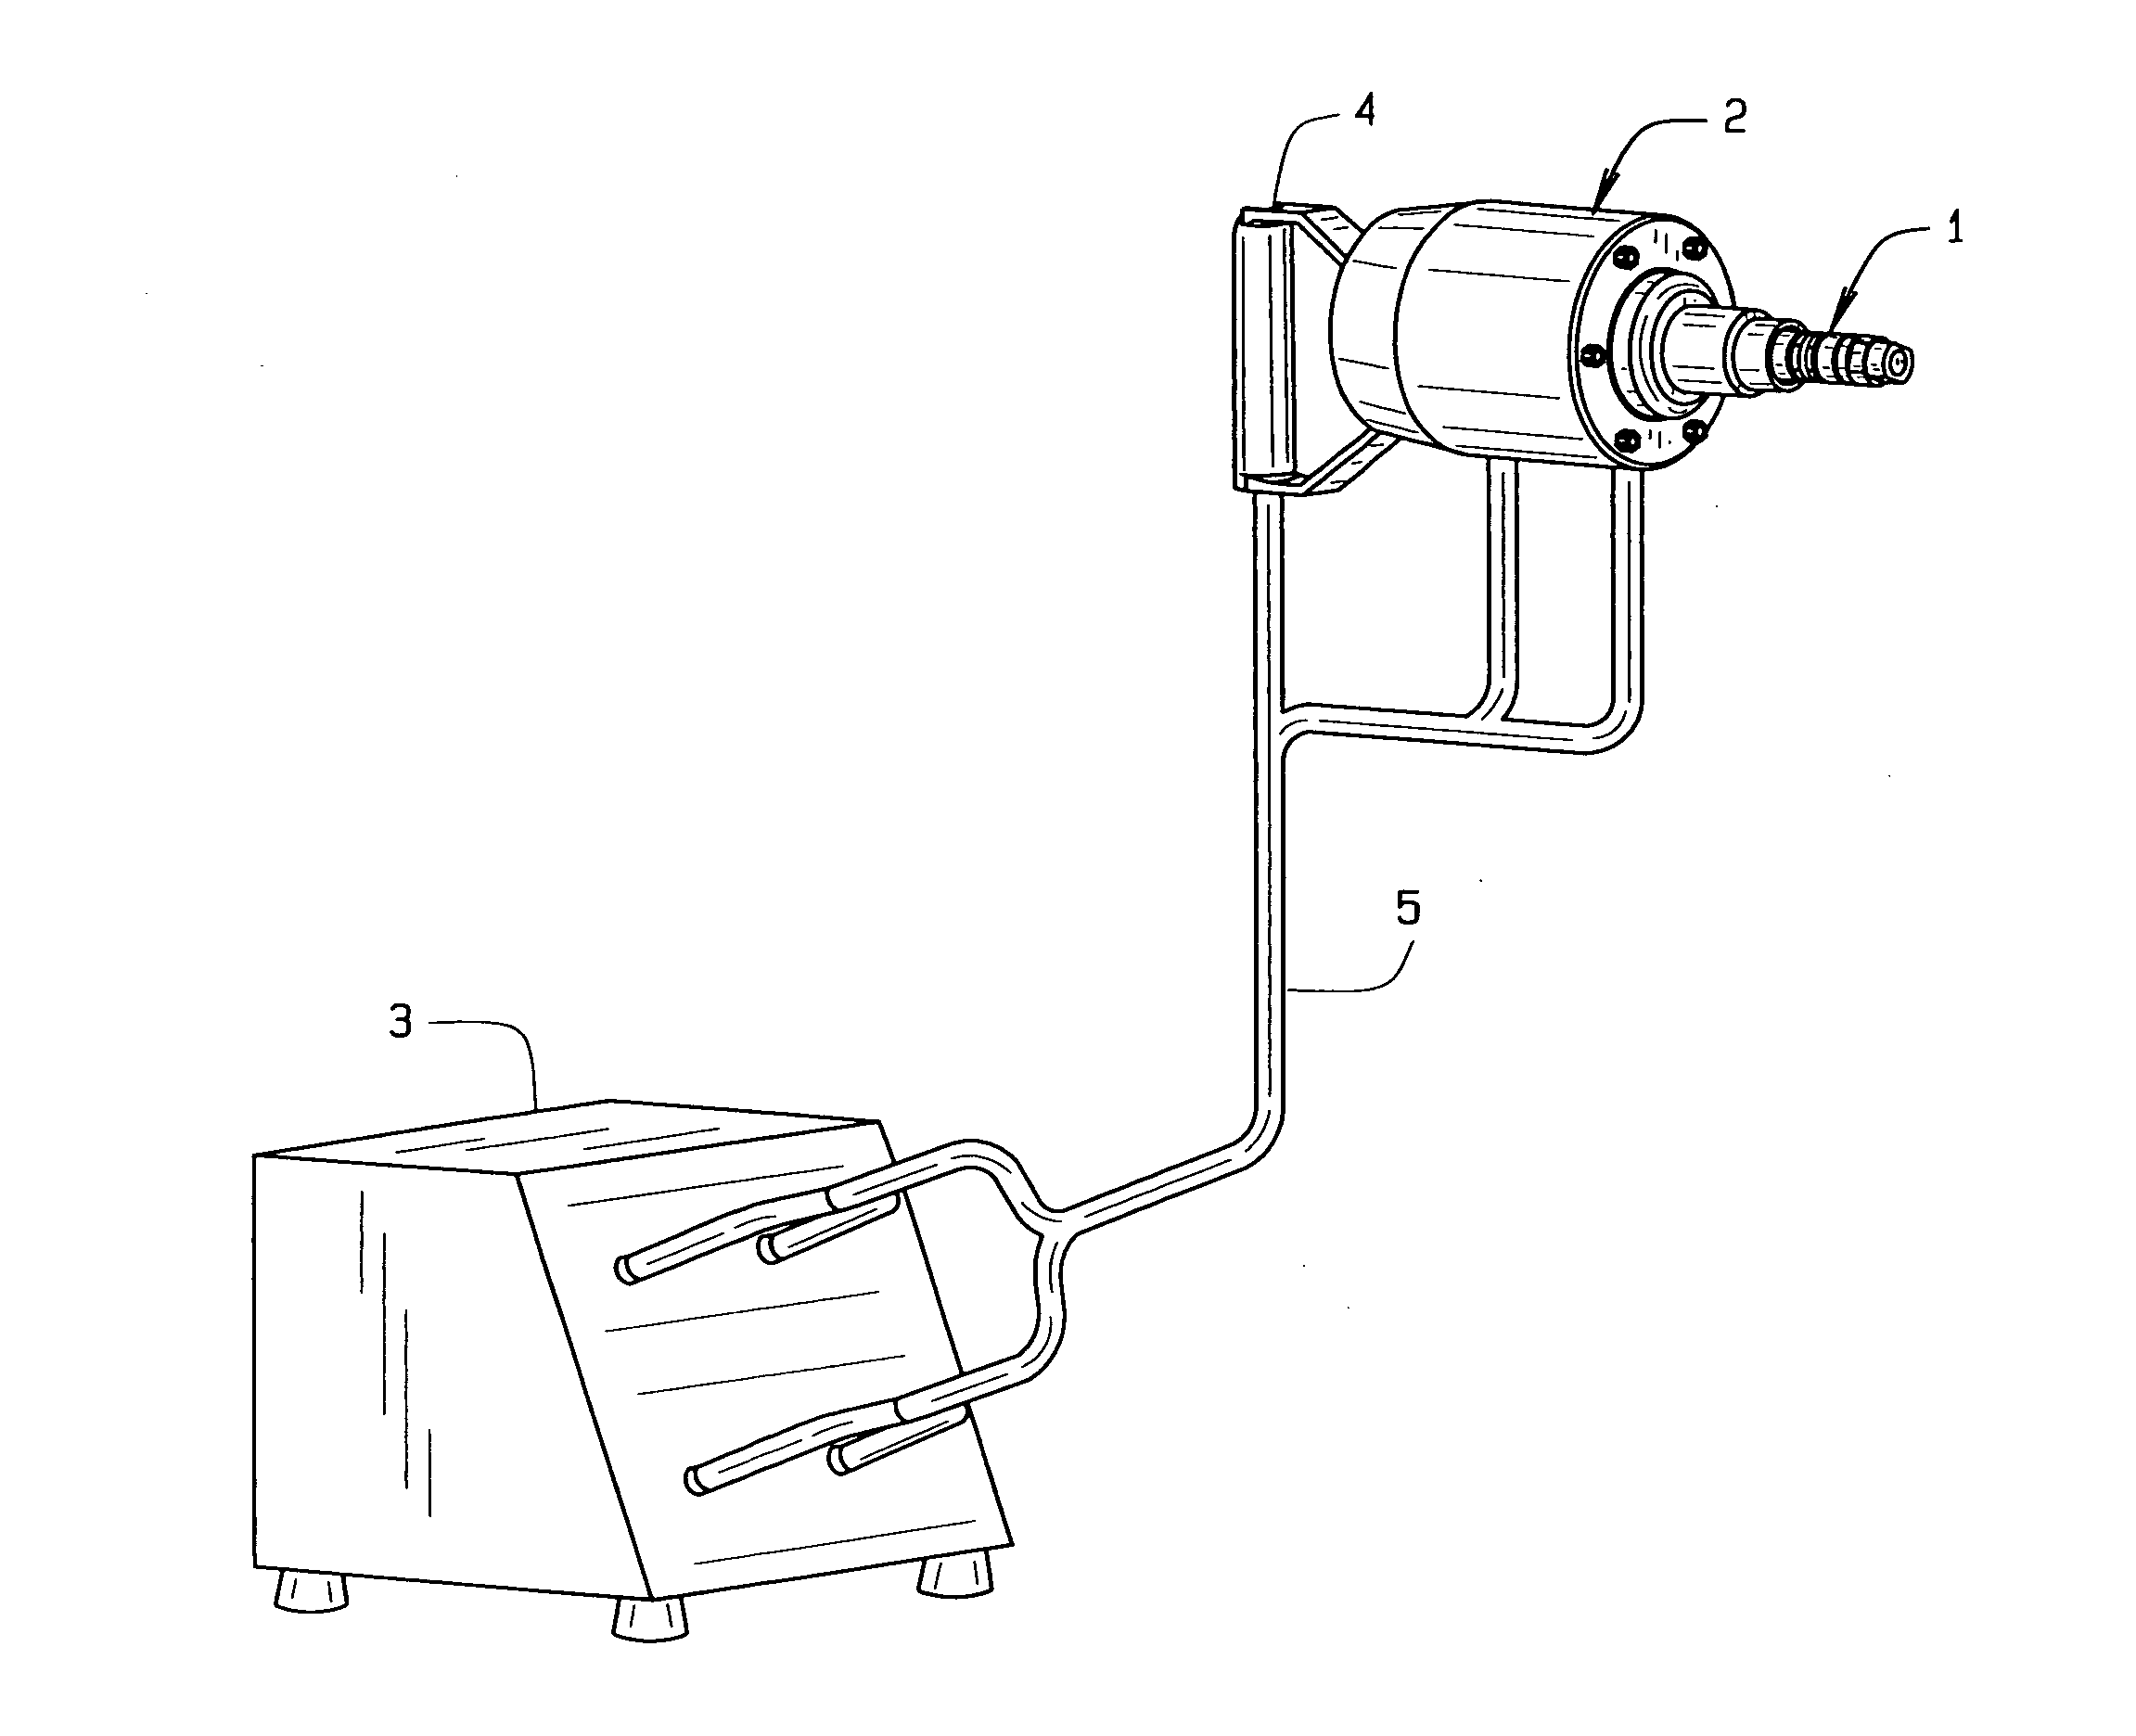 System and method for radially expanding hollow cylindrical objects